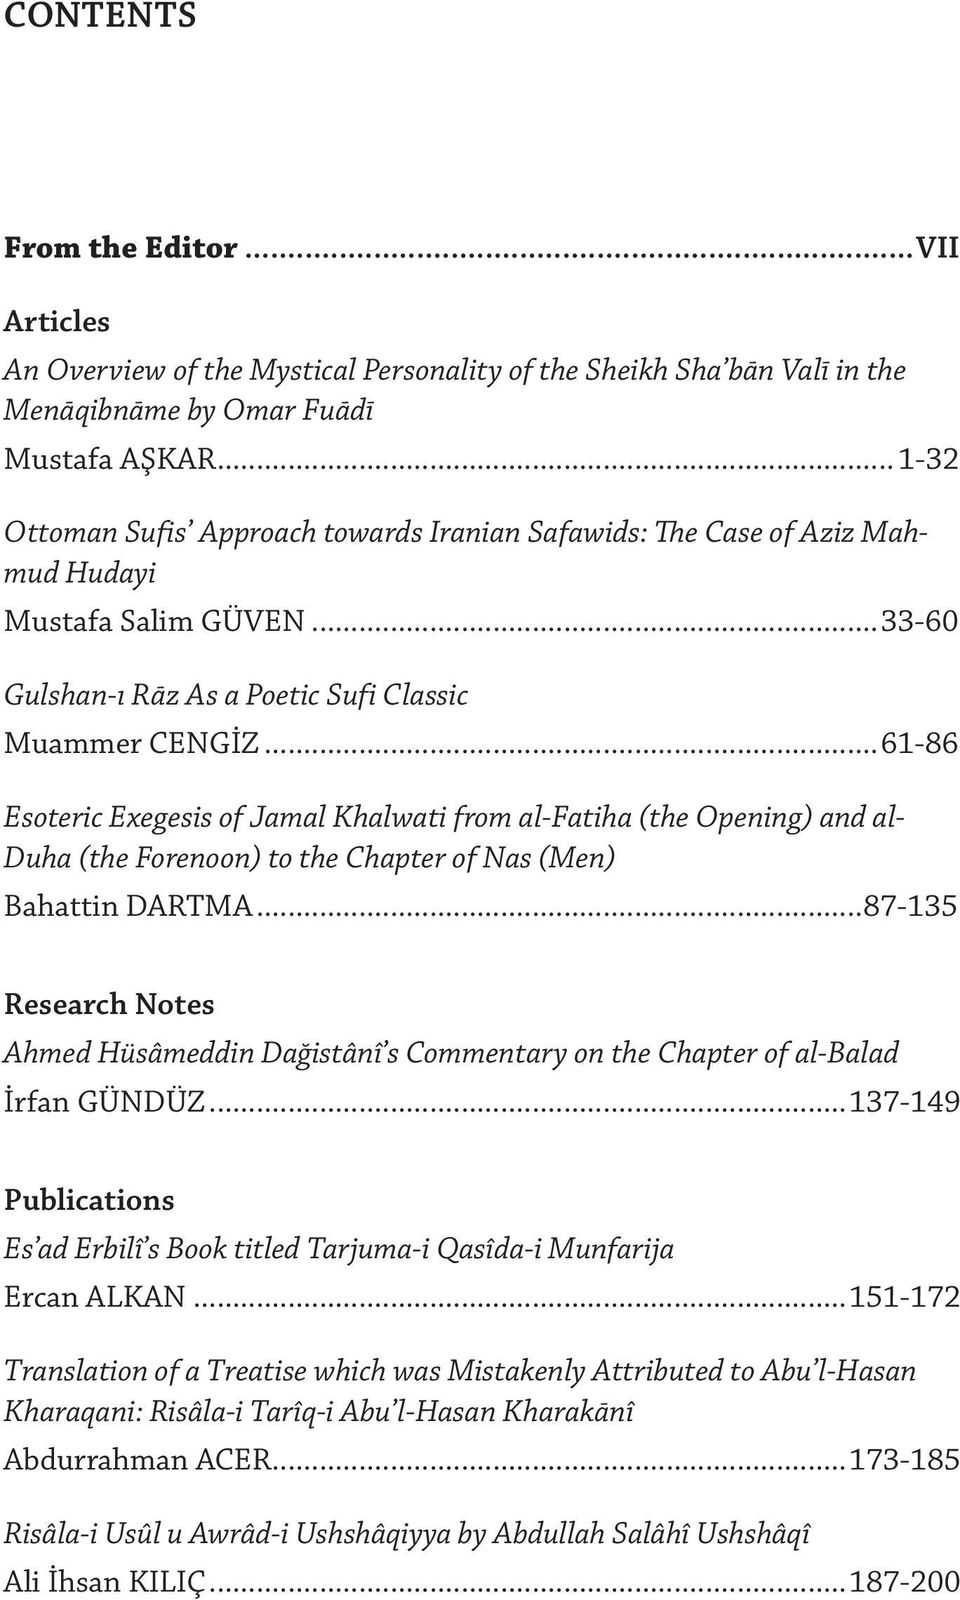 ..61-86 Esoteric Exegesis of Jamal Khalwati from al-fatiha (the Opening) and al- Duha (the Forenoon) to the Chapter of Nas (Men) Bahattin DARTMA.